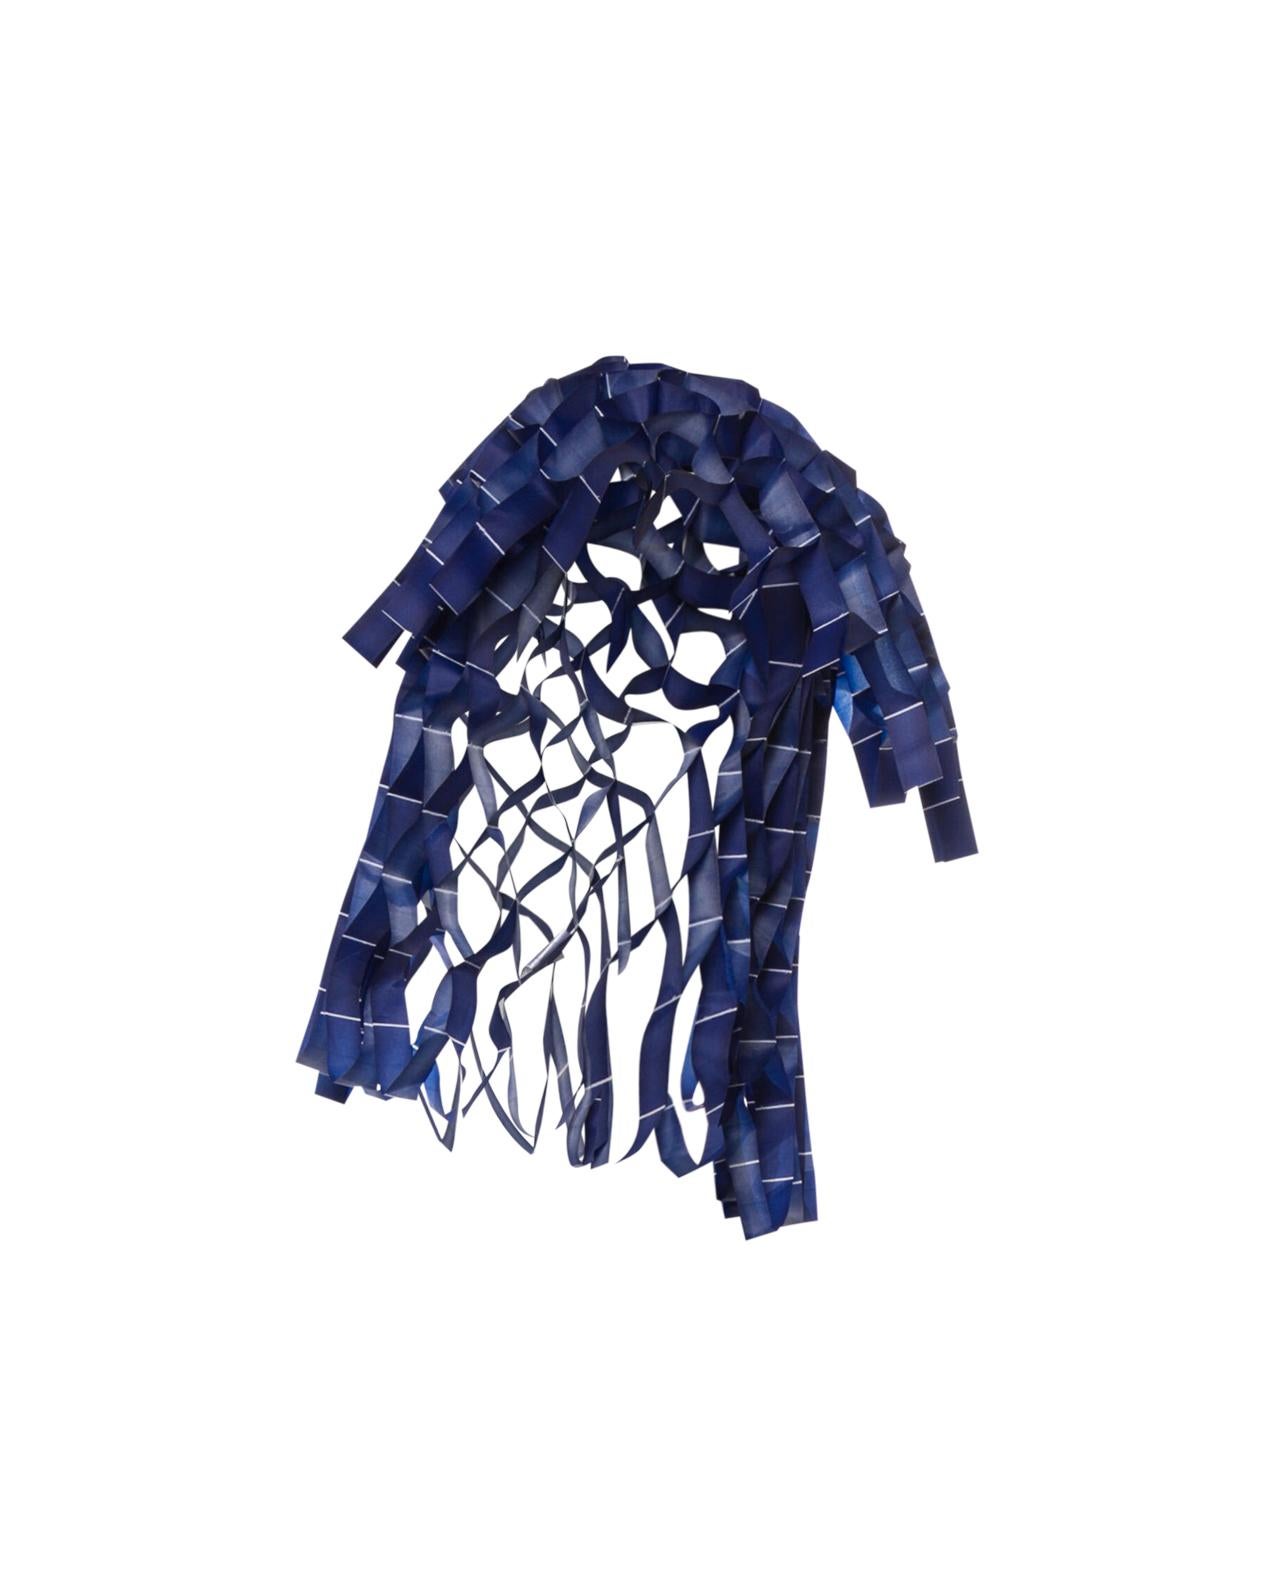 S/S 1991 Issey Miyake Blue 3D Cage Top In Excellent Condition For Sale In North Hollywood, CA